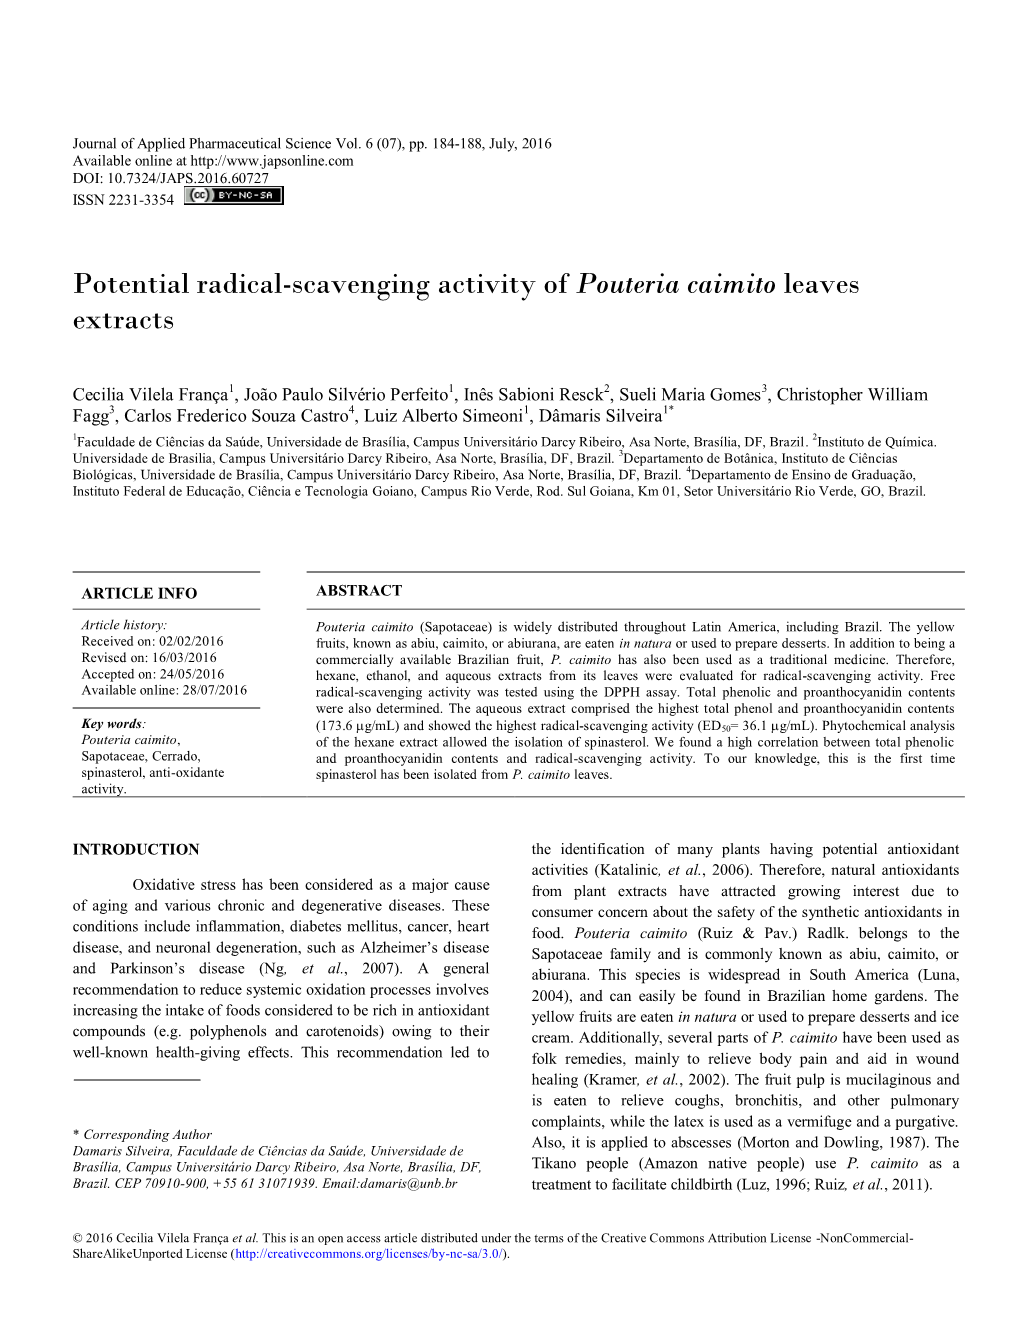 Potential Radical-Scavenging Activity of Pouteria Caimito Leaves Extracts